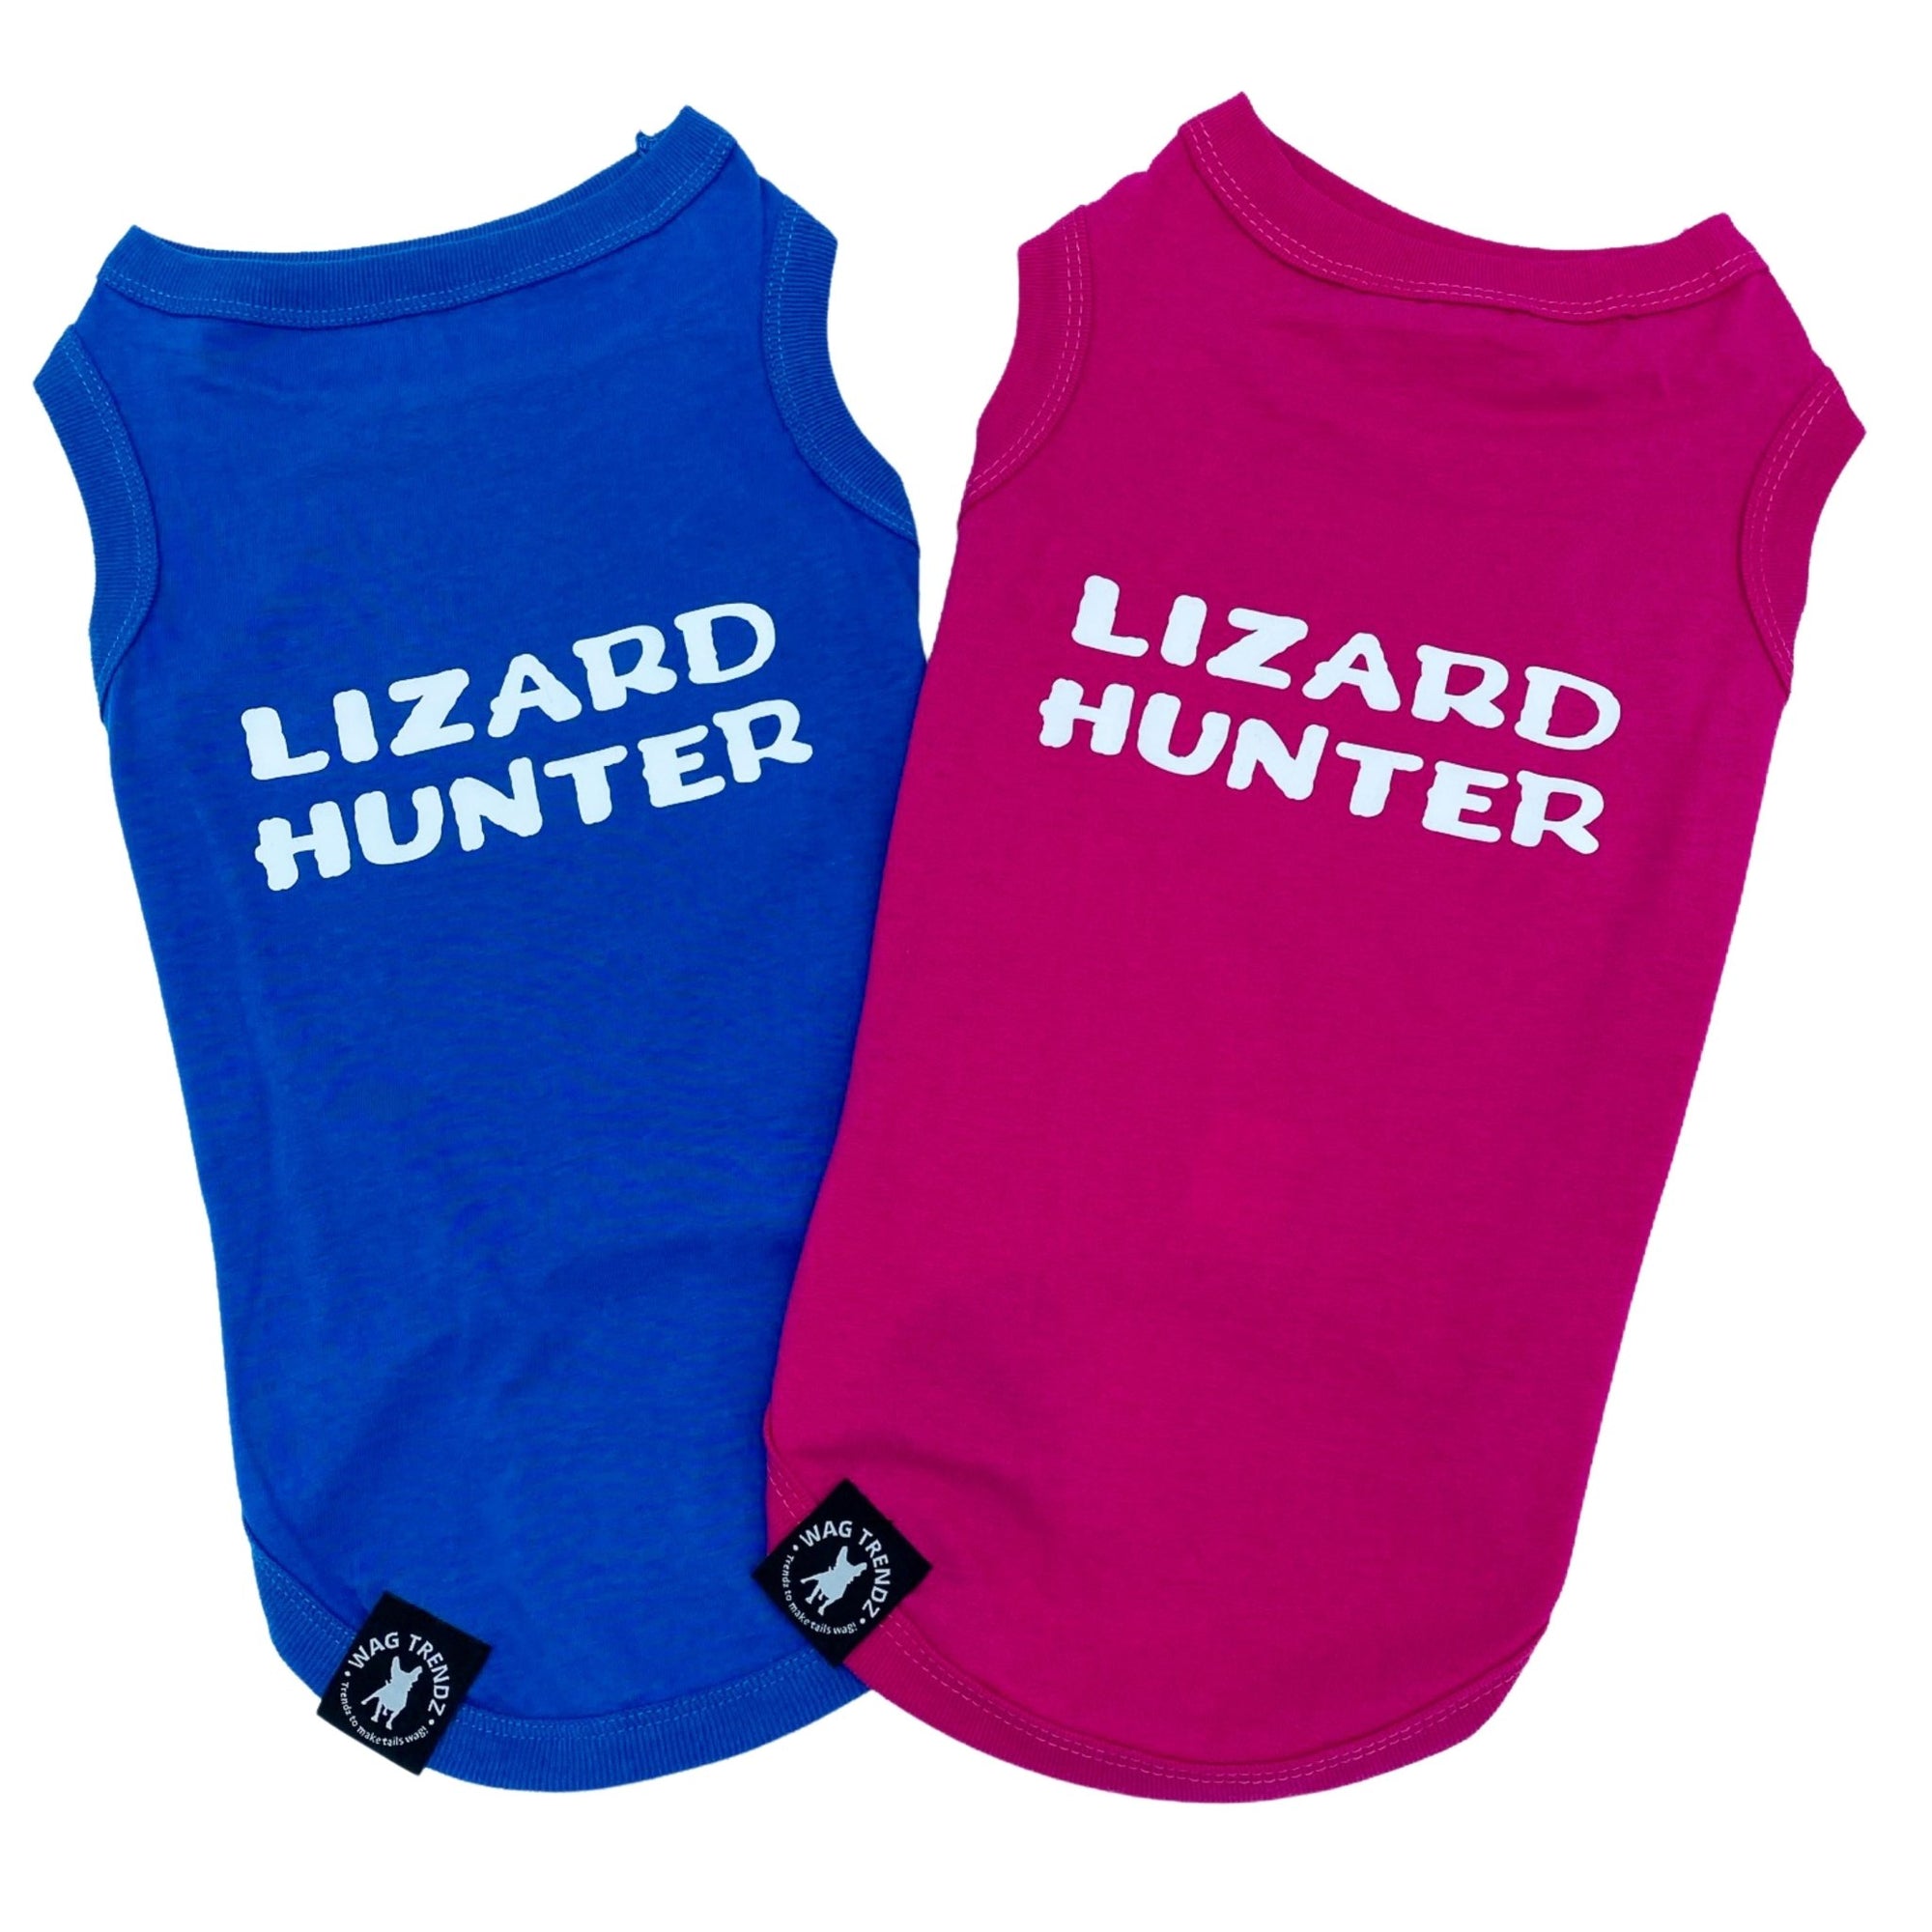 Dog T-Shirt - &quot;Lizard Hunter&quot; - Royal Blue and Hot Pink dog t-shirts - back view with Lizard Hunter lettering in white - against solid white background - Wag Trendz